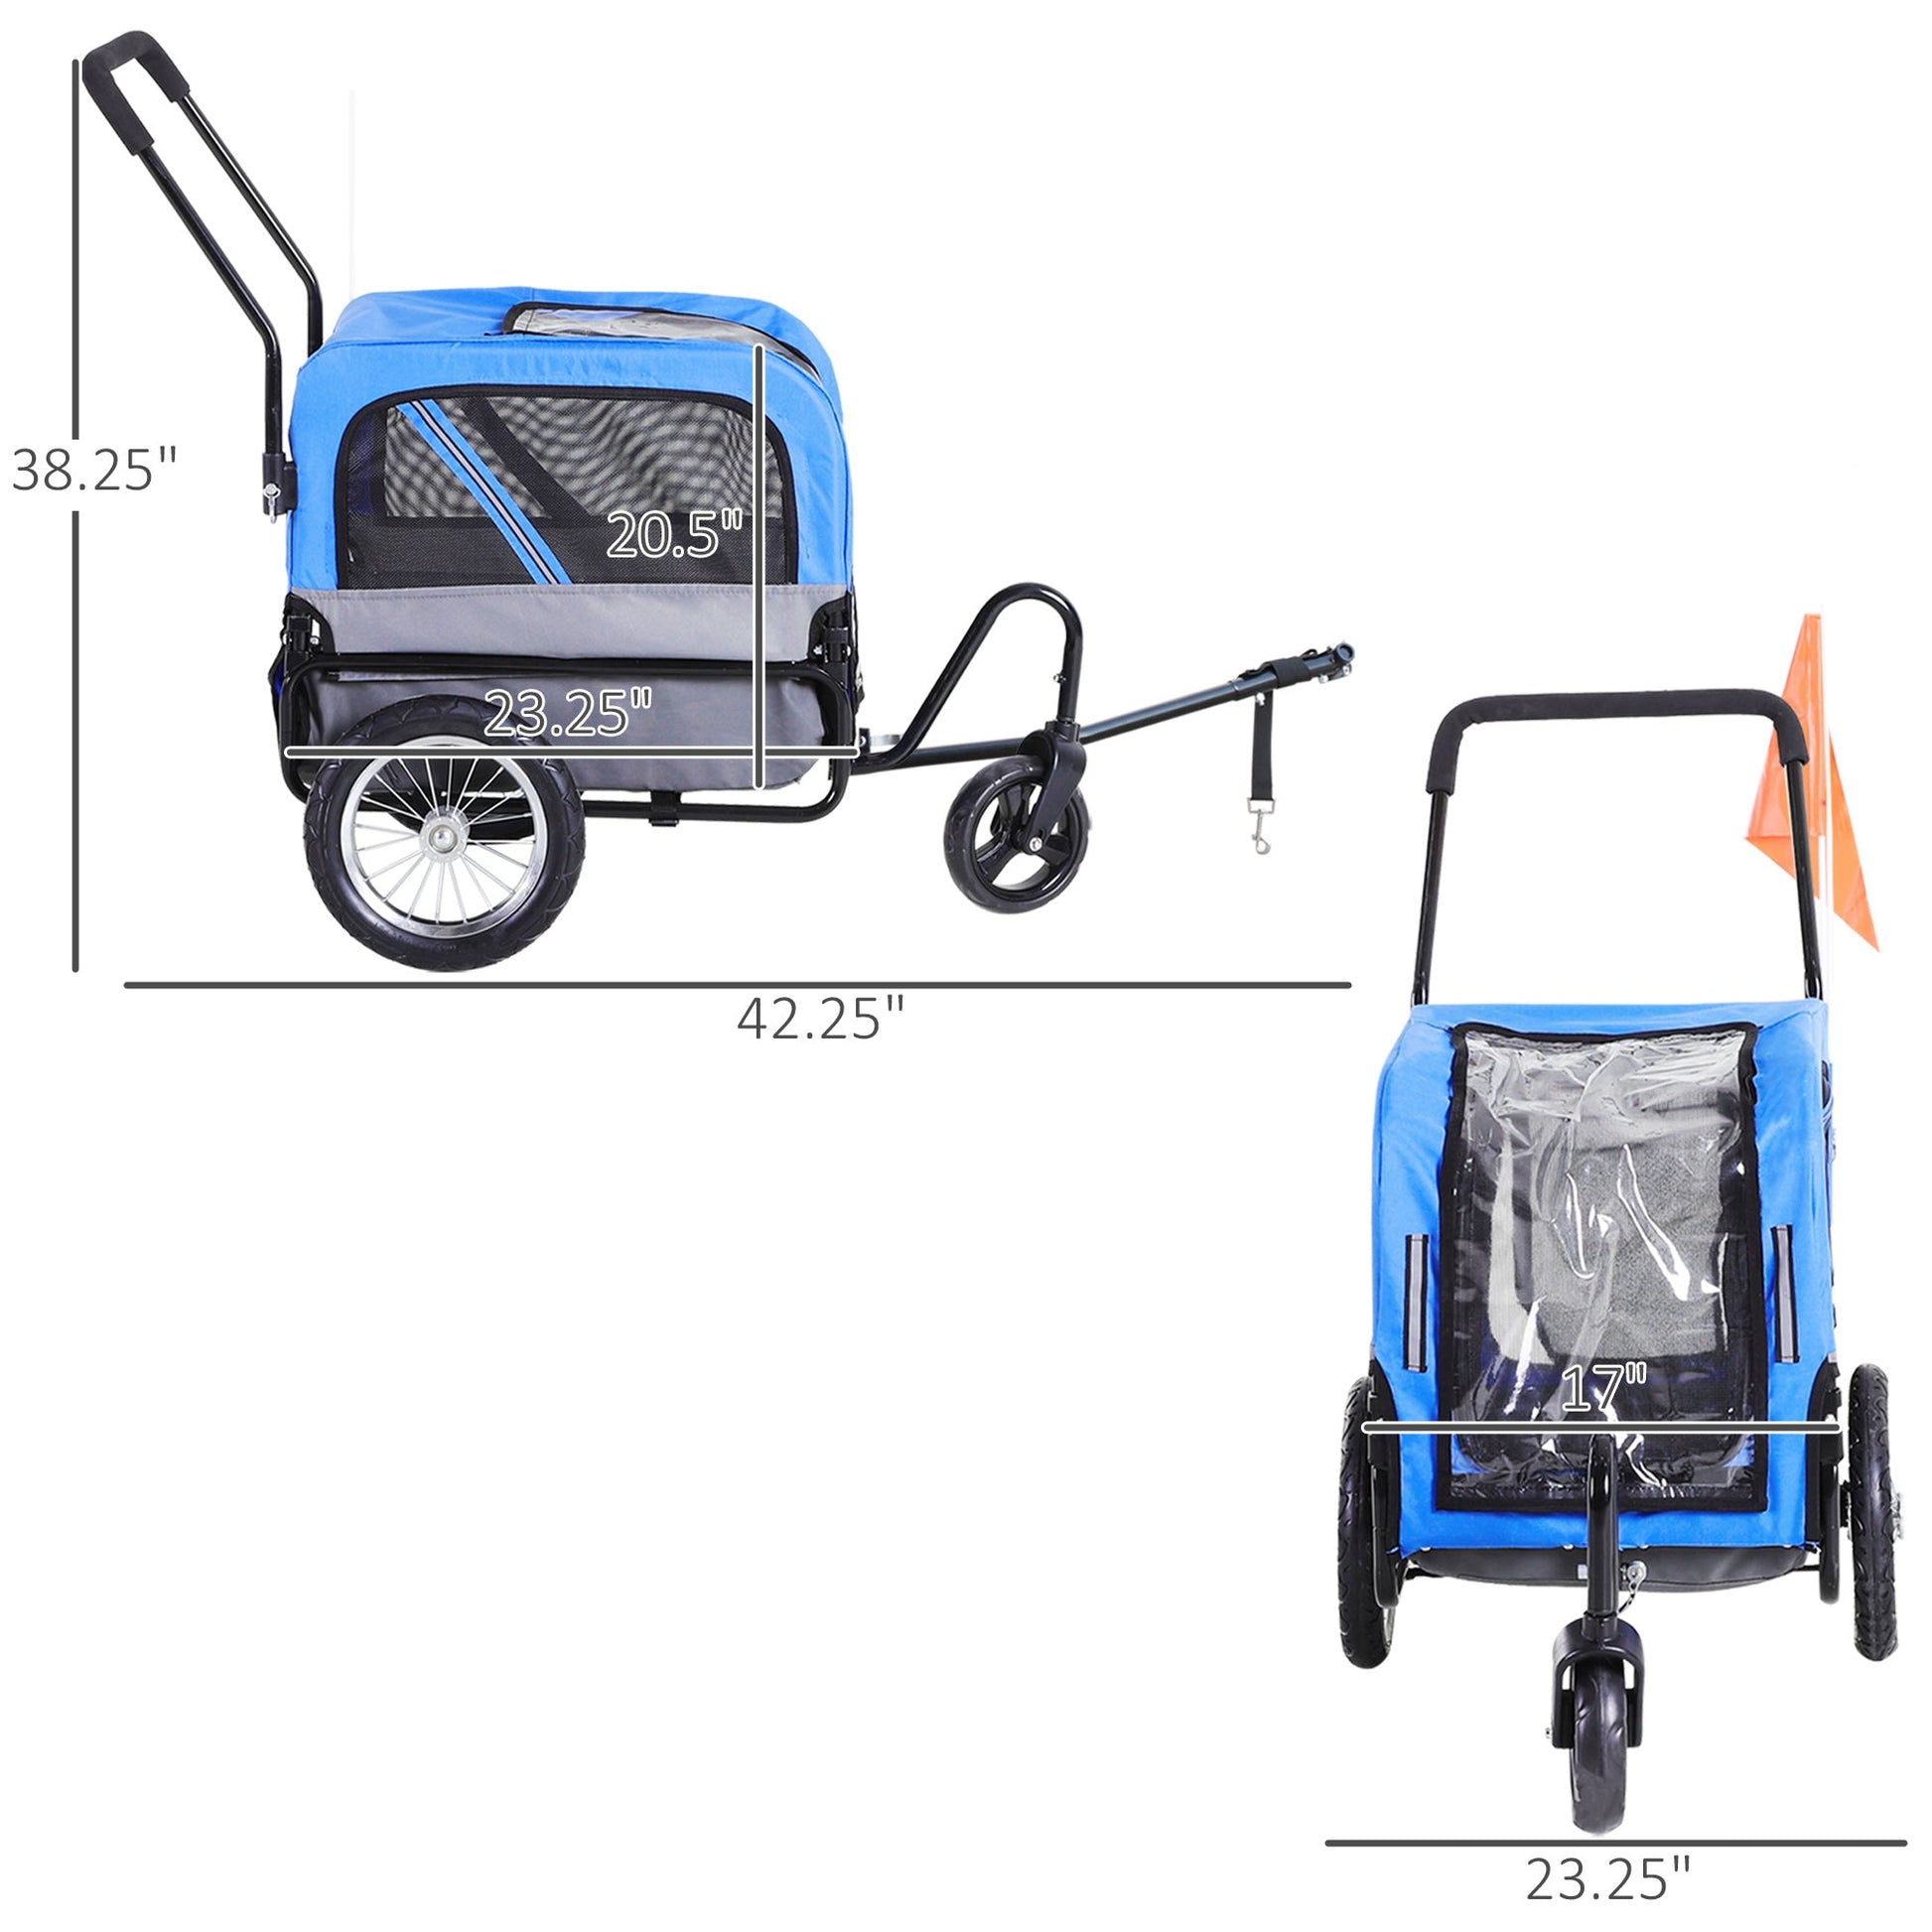 Dog Bike Trailer 2-In-1 Pet Stroller Cart Bicycle Wagon Cargo Carrier Attachment for Travel with 360 Swivel Wheel, Hitch, Suspension, Safety Flag, Blue at Gallery Canada